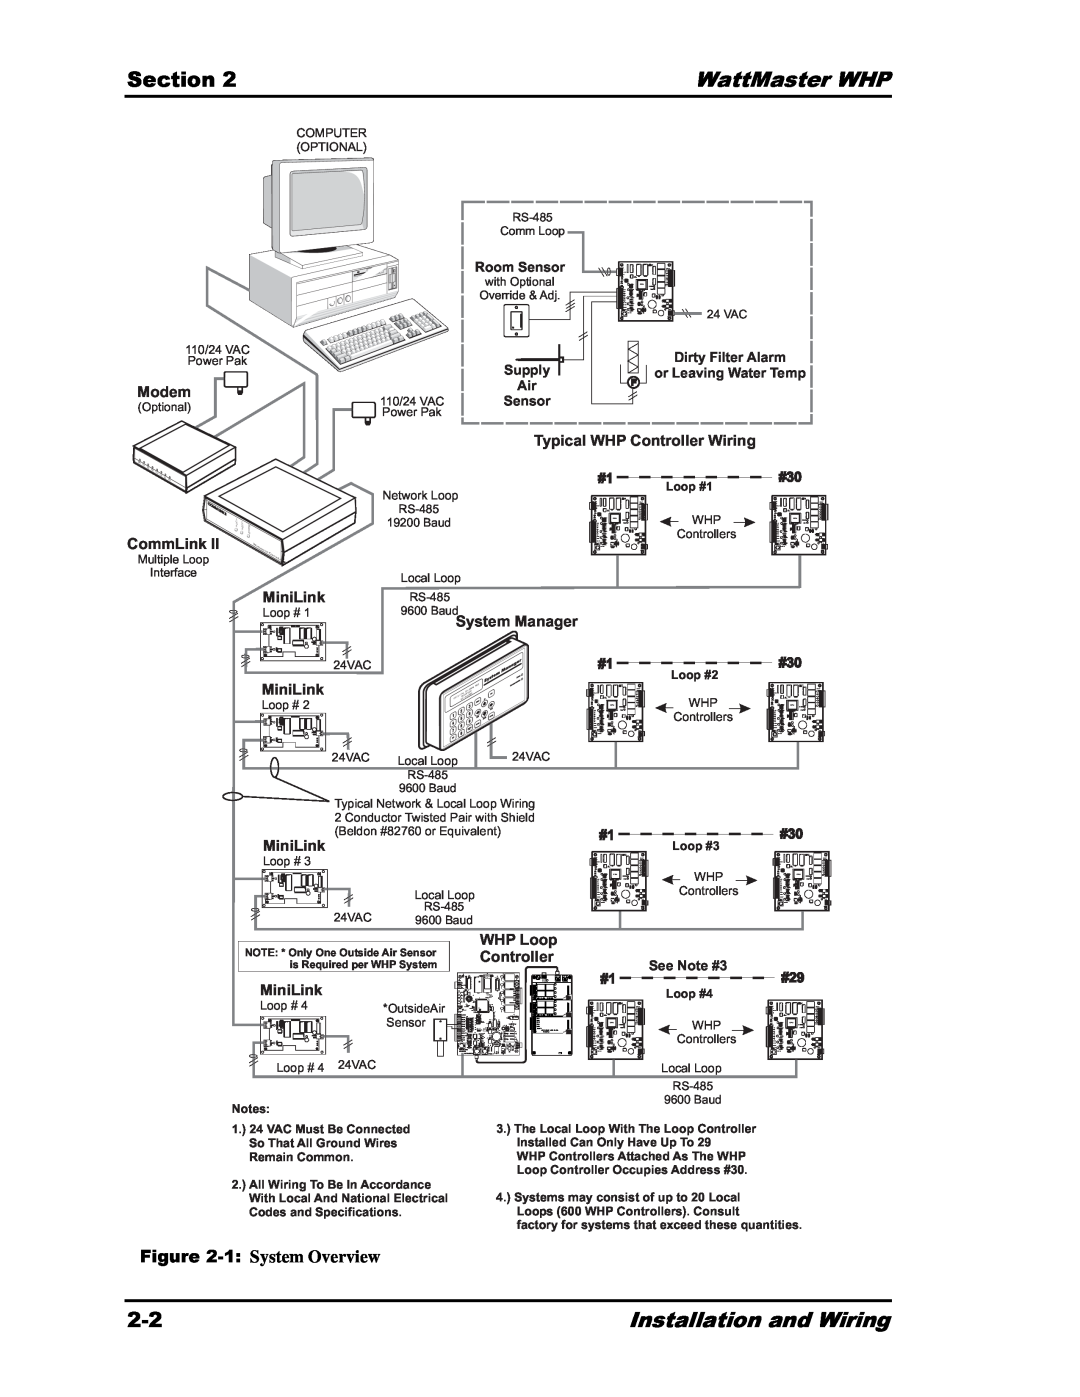 Heat Controller Water Source Heat Pump Section, WattMaster WHP, Installation and Wiring, System Overview, Modem, MiniLink 